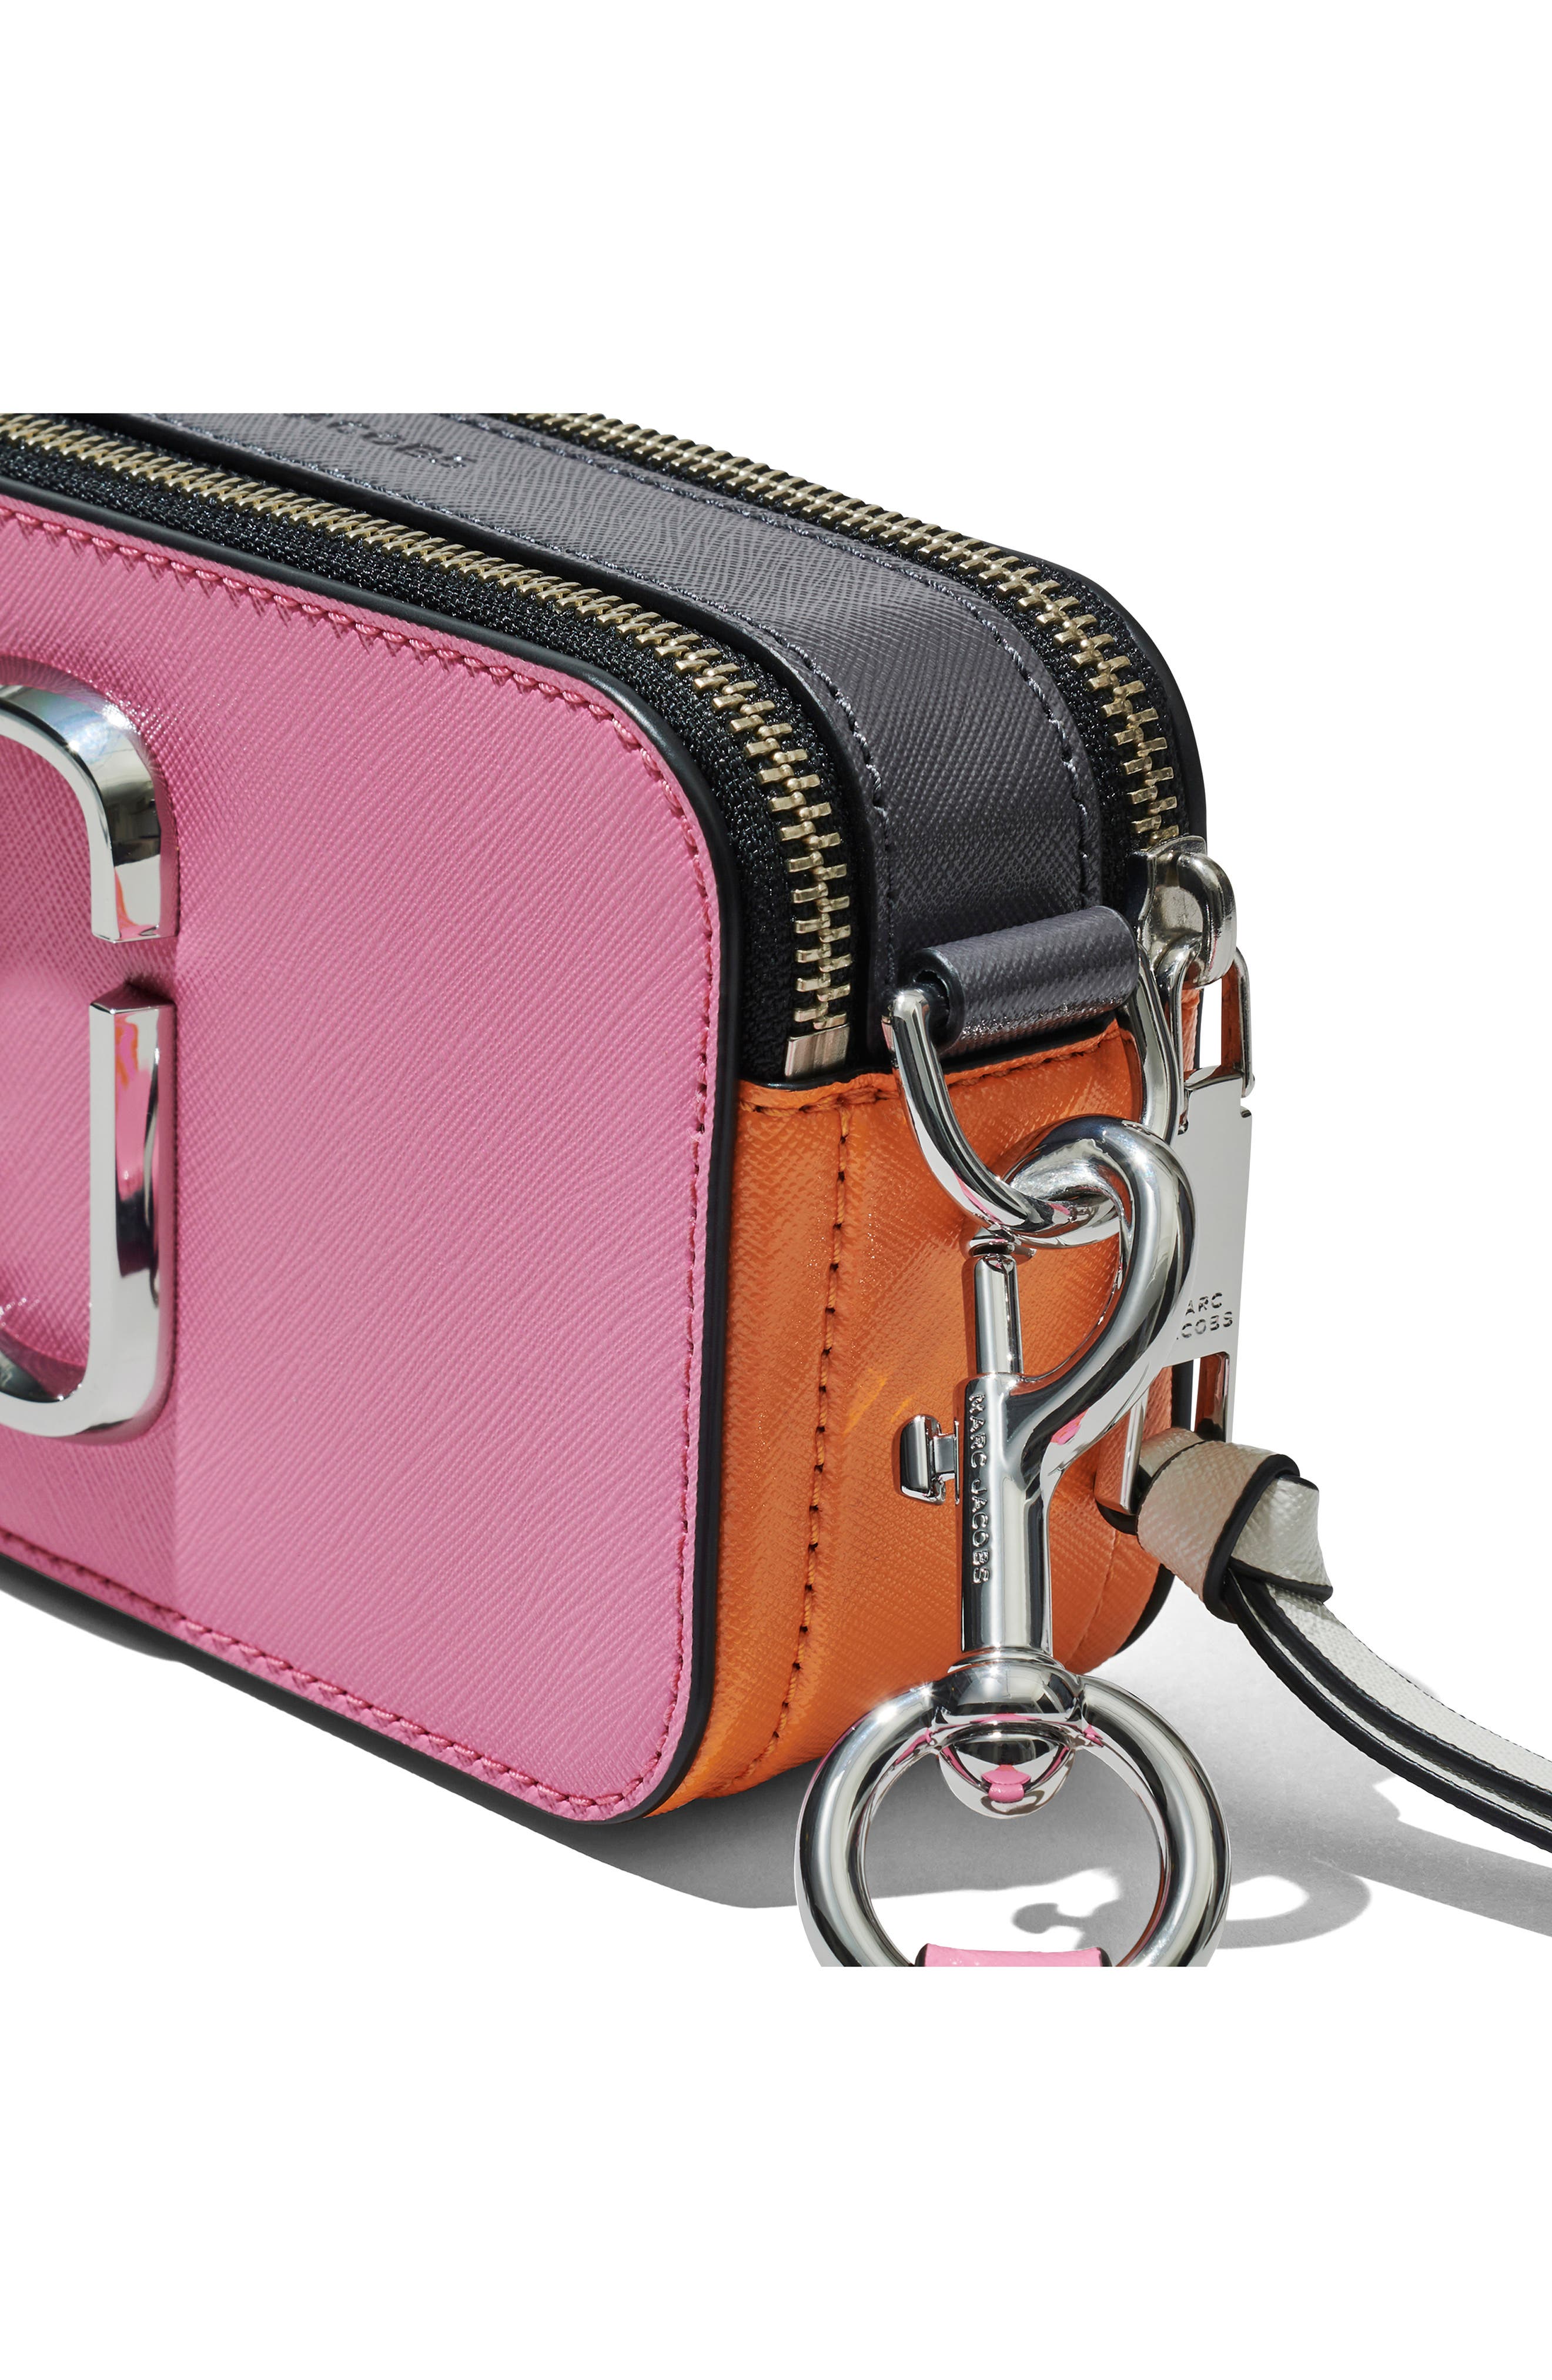 Marc Jacobs The Snapshot Bag in Candy Pink Multi